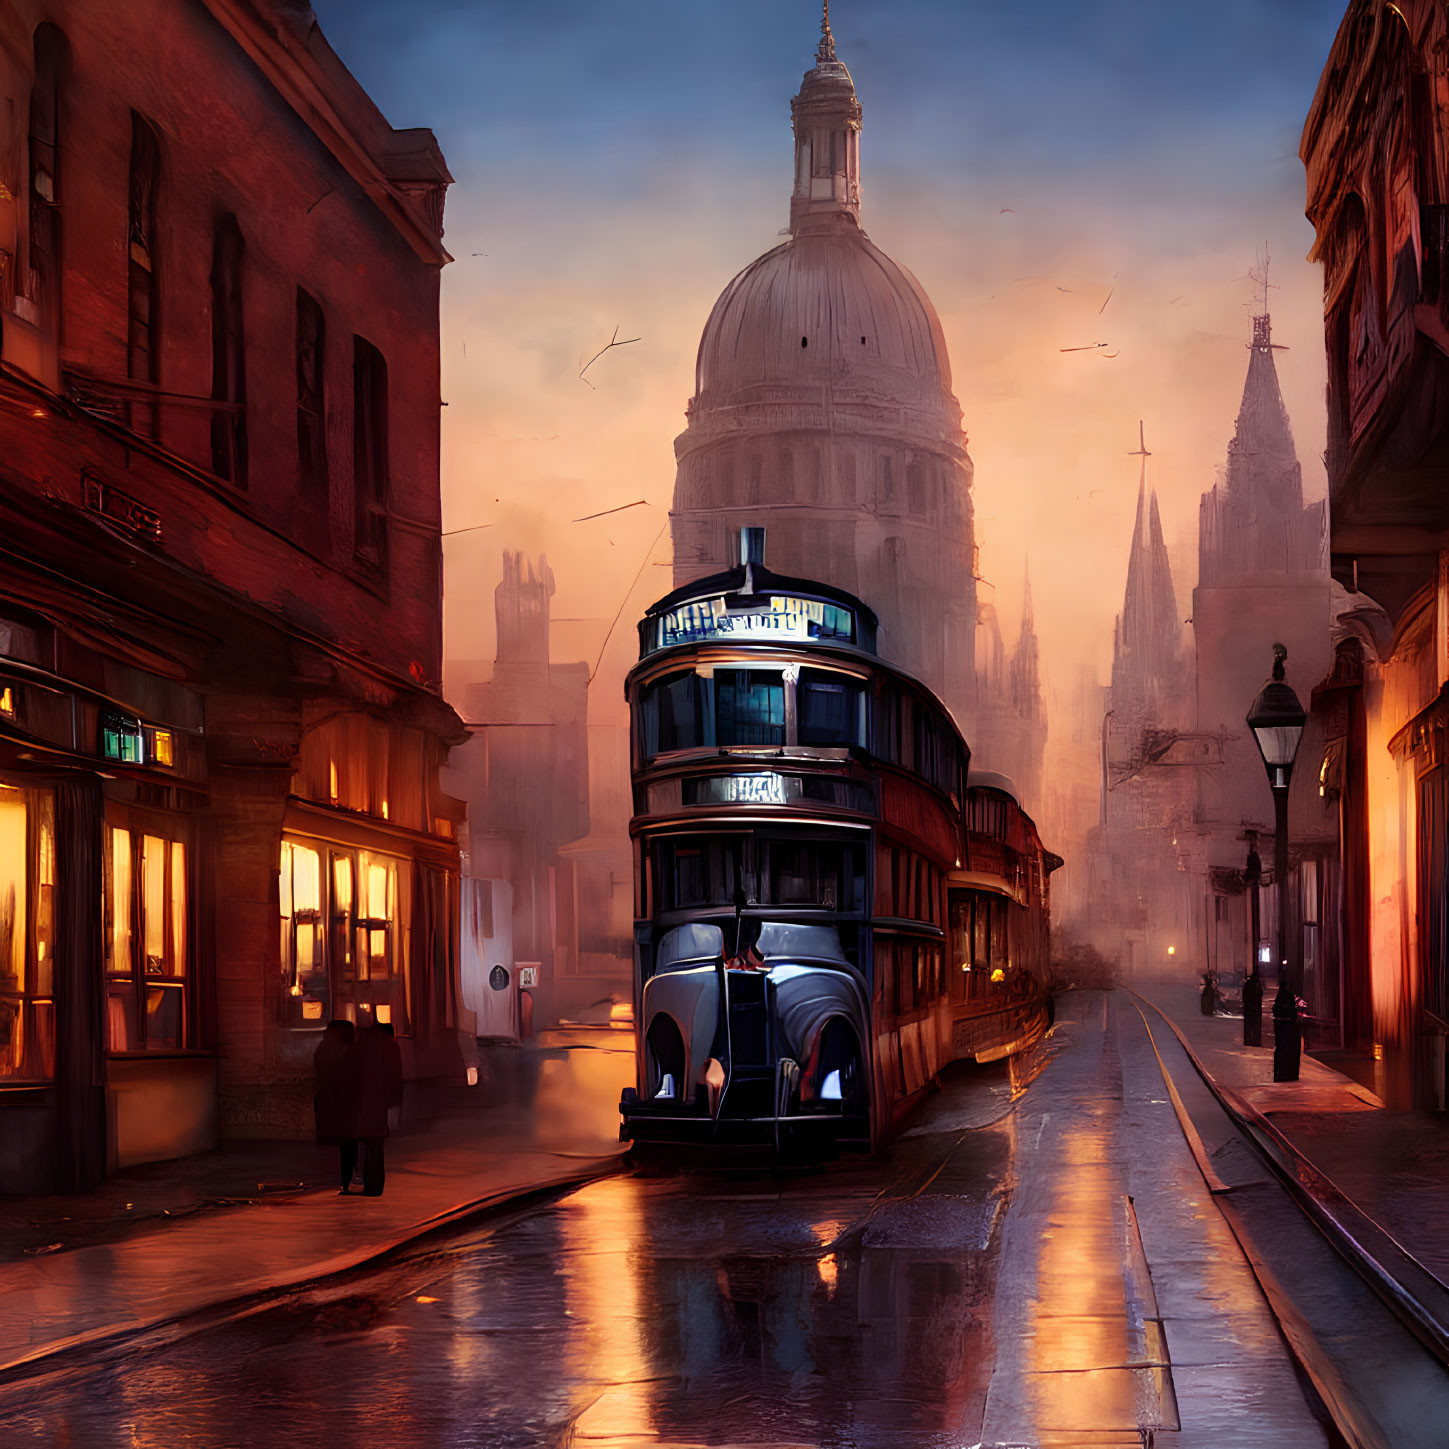 Vintage double-decker bus on cobblestone street near St. Paul's Cathedral at dusk with birds